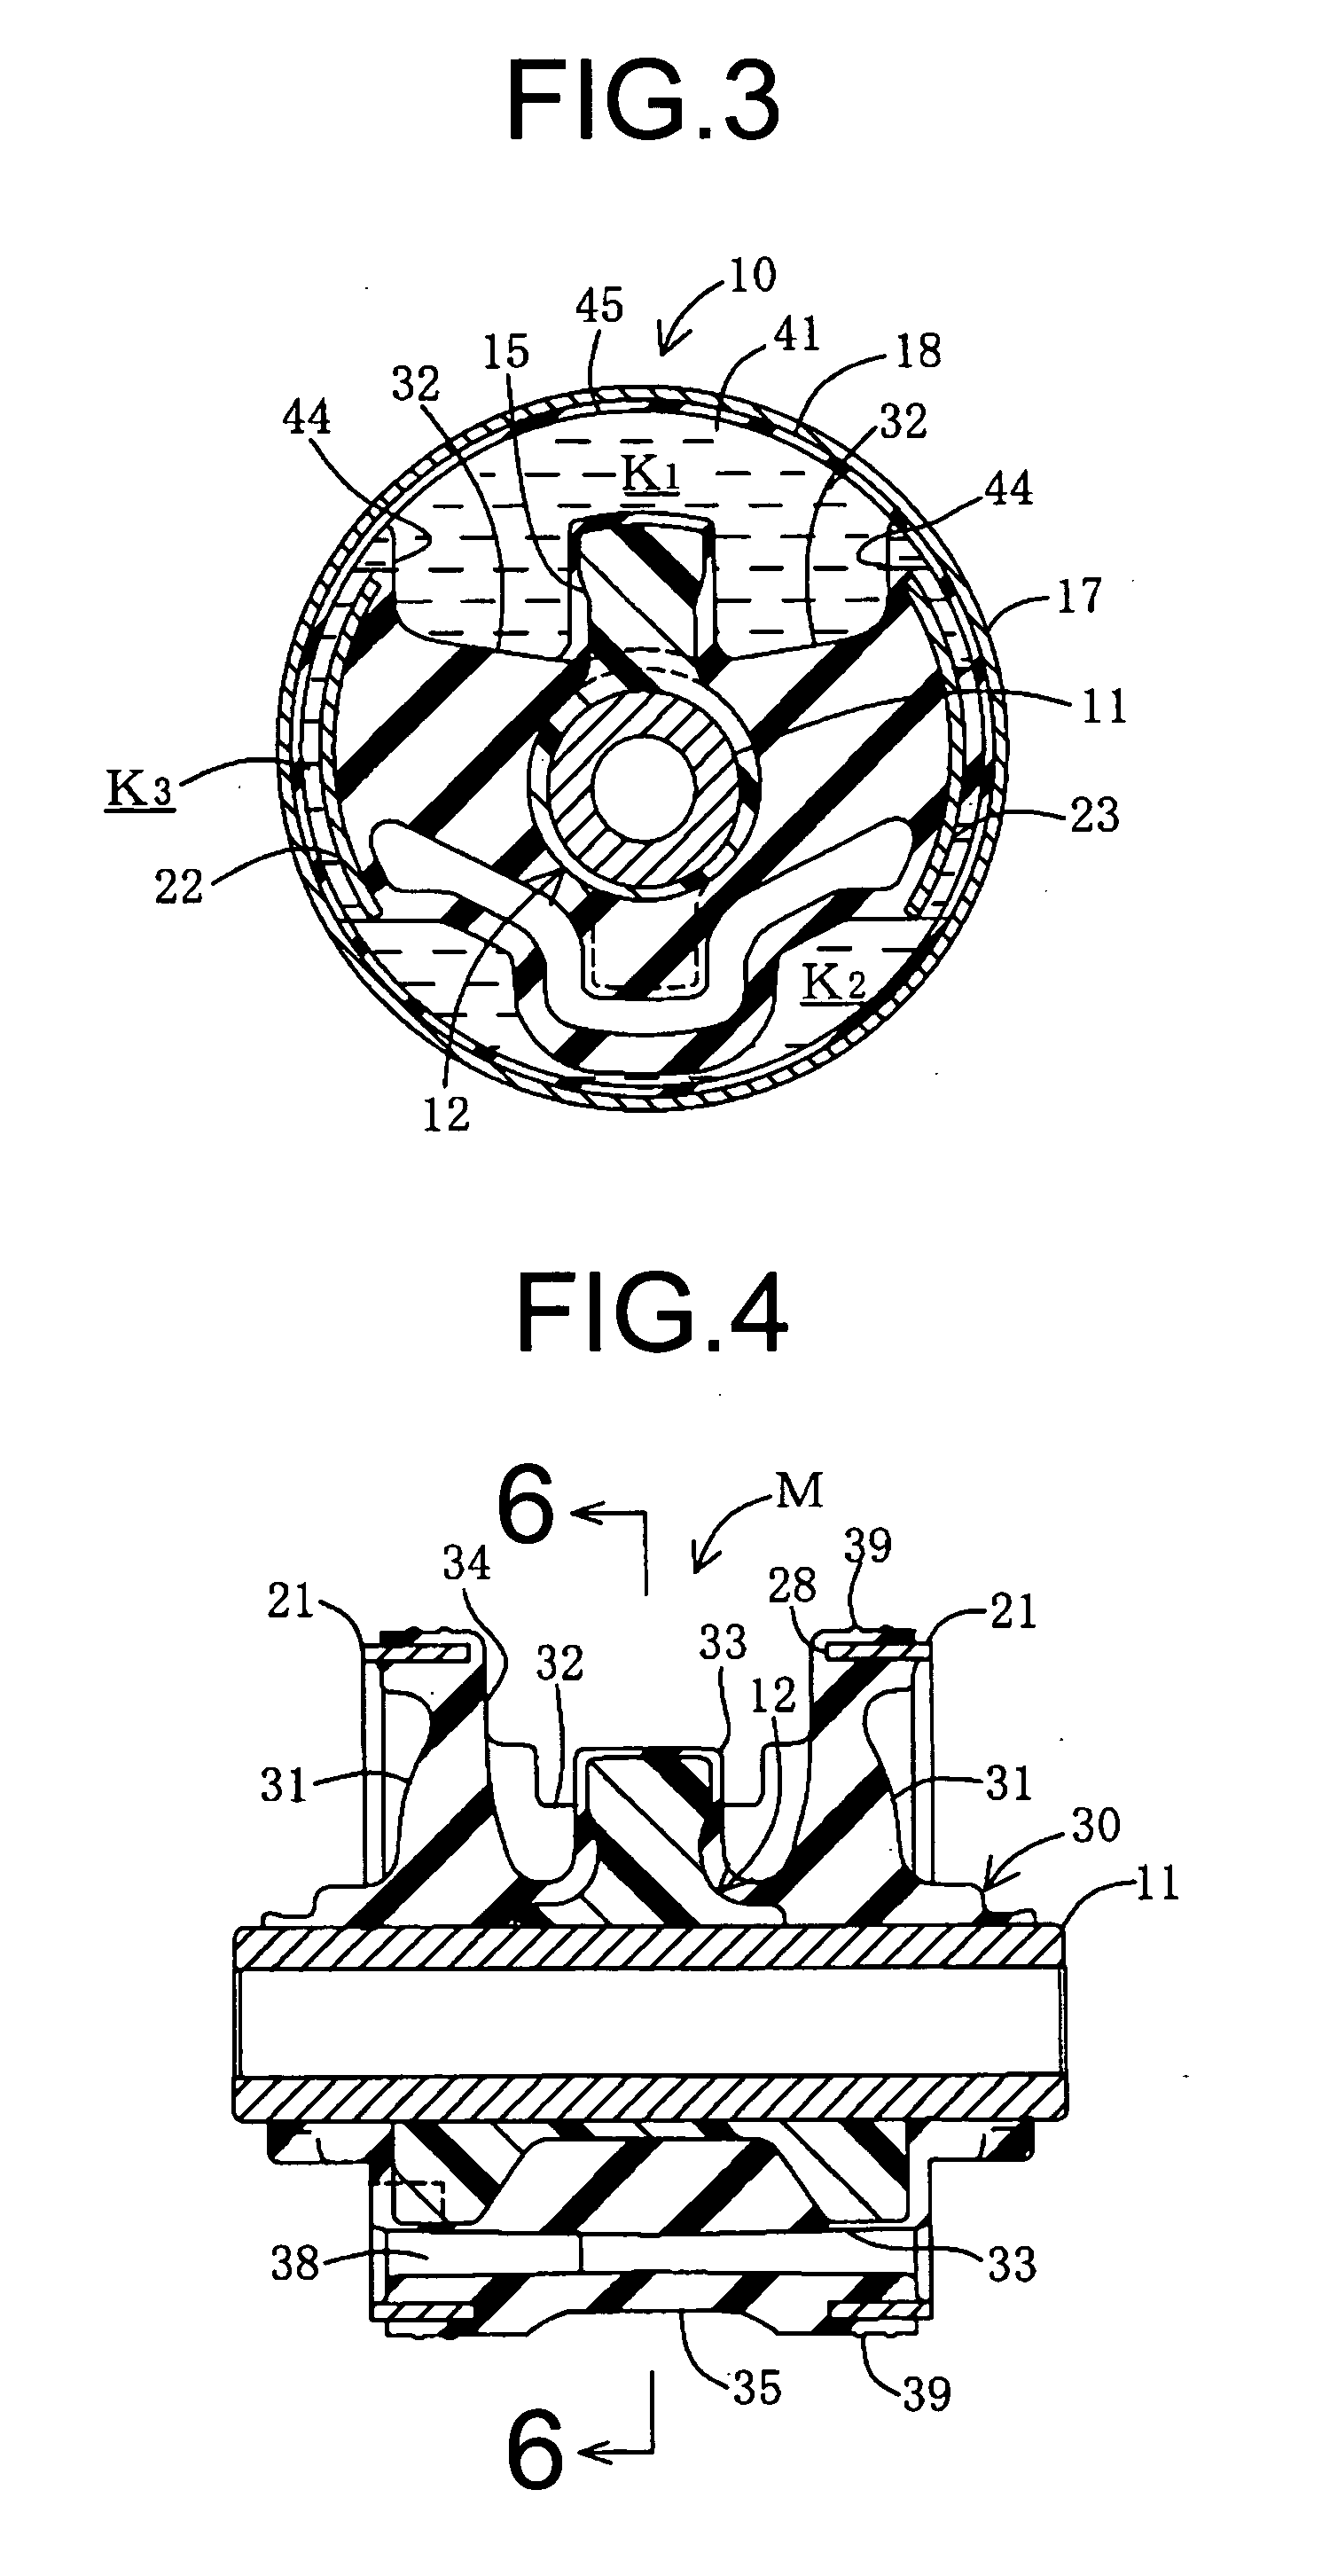 Cylindrical fluid-filled vibration damping device